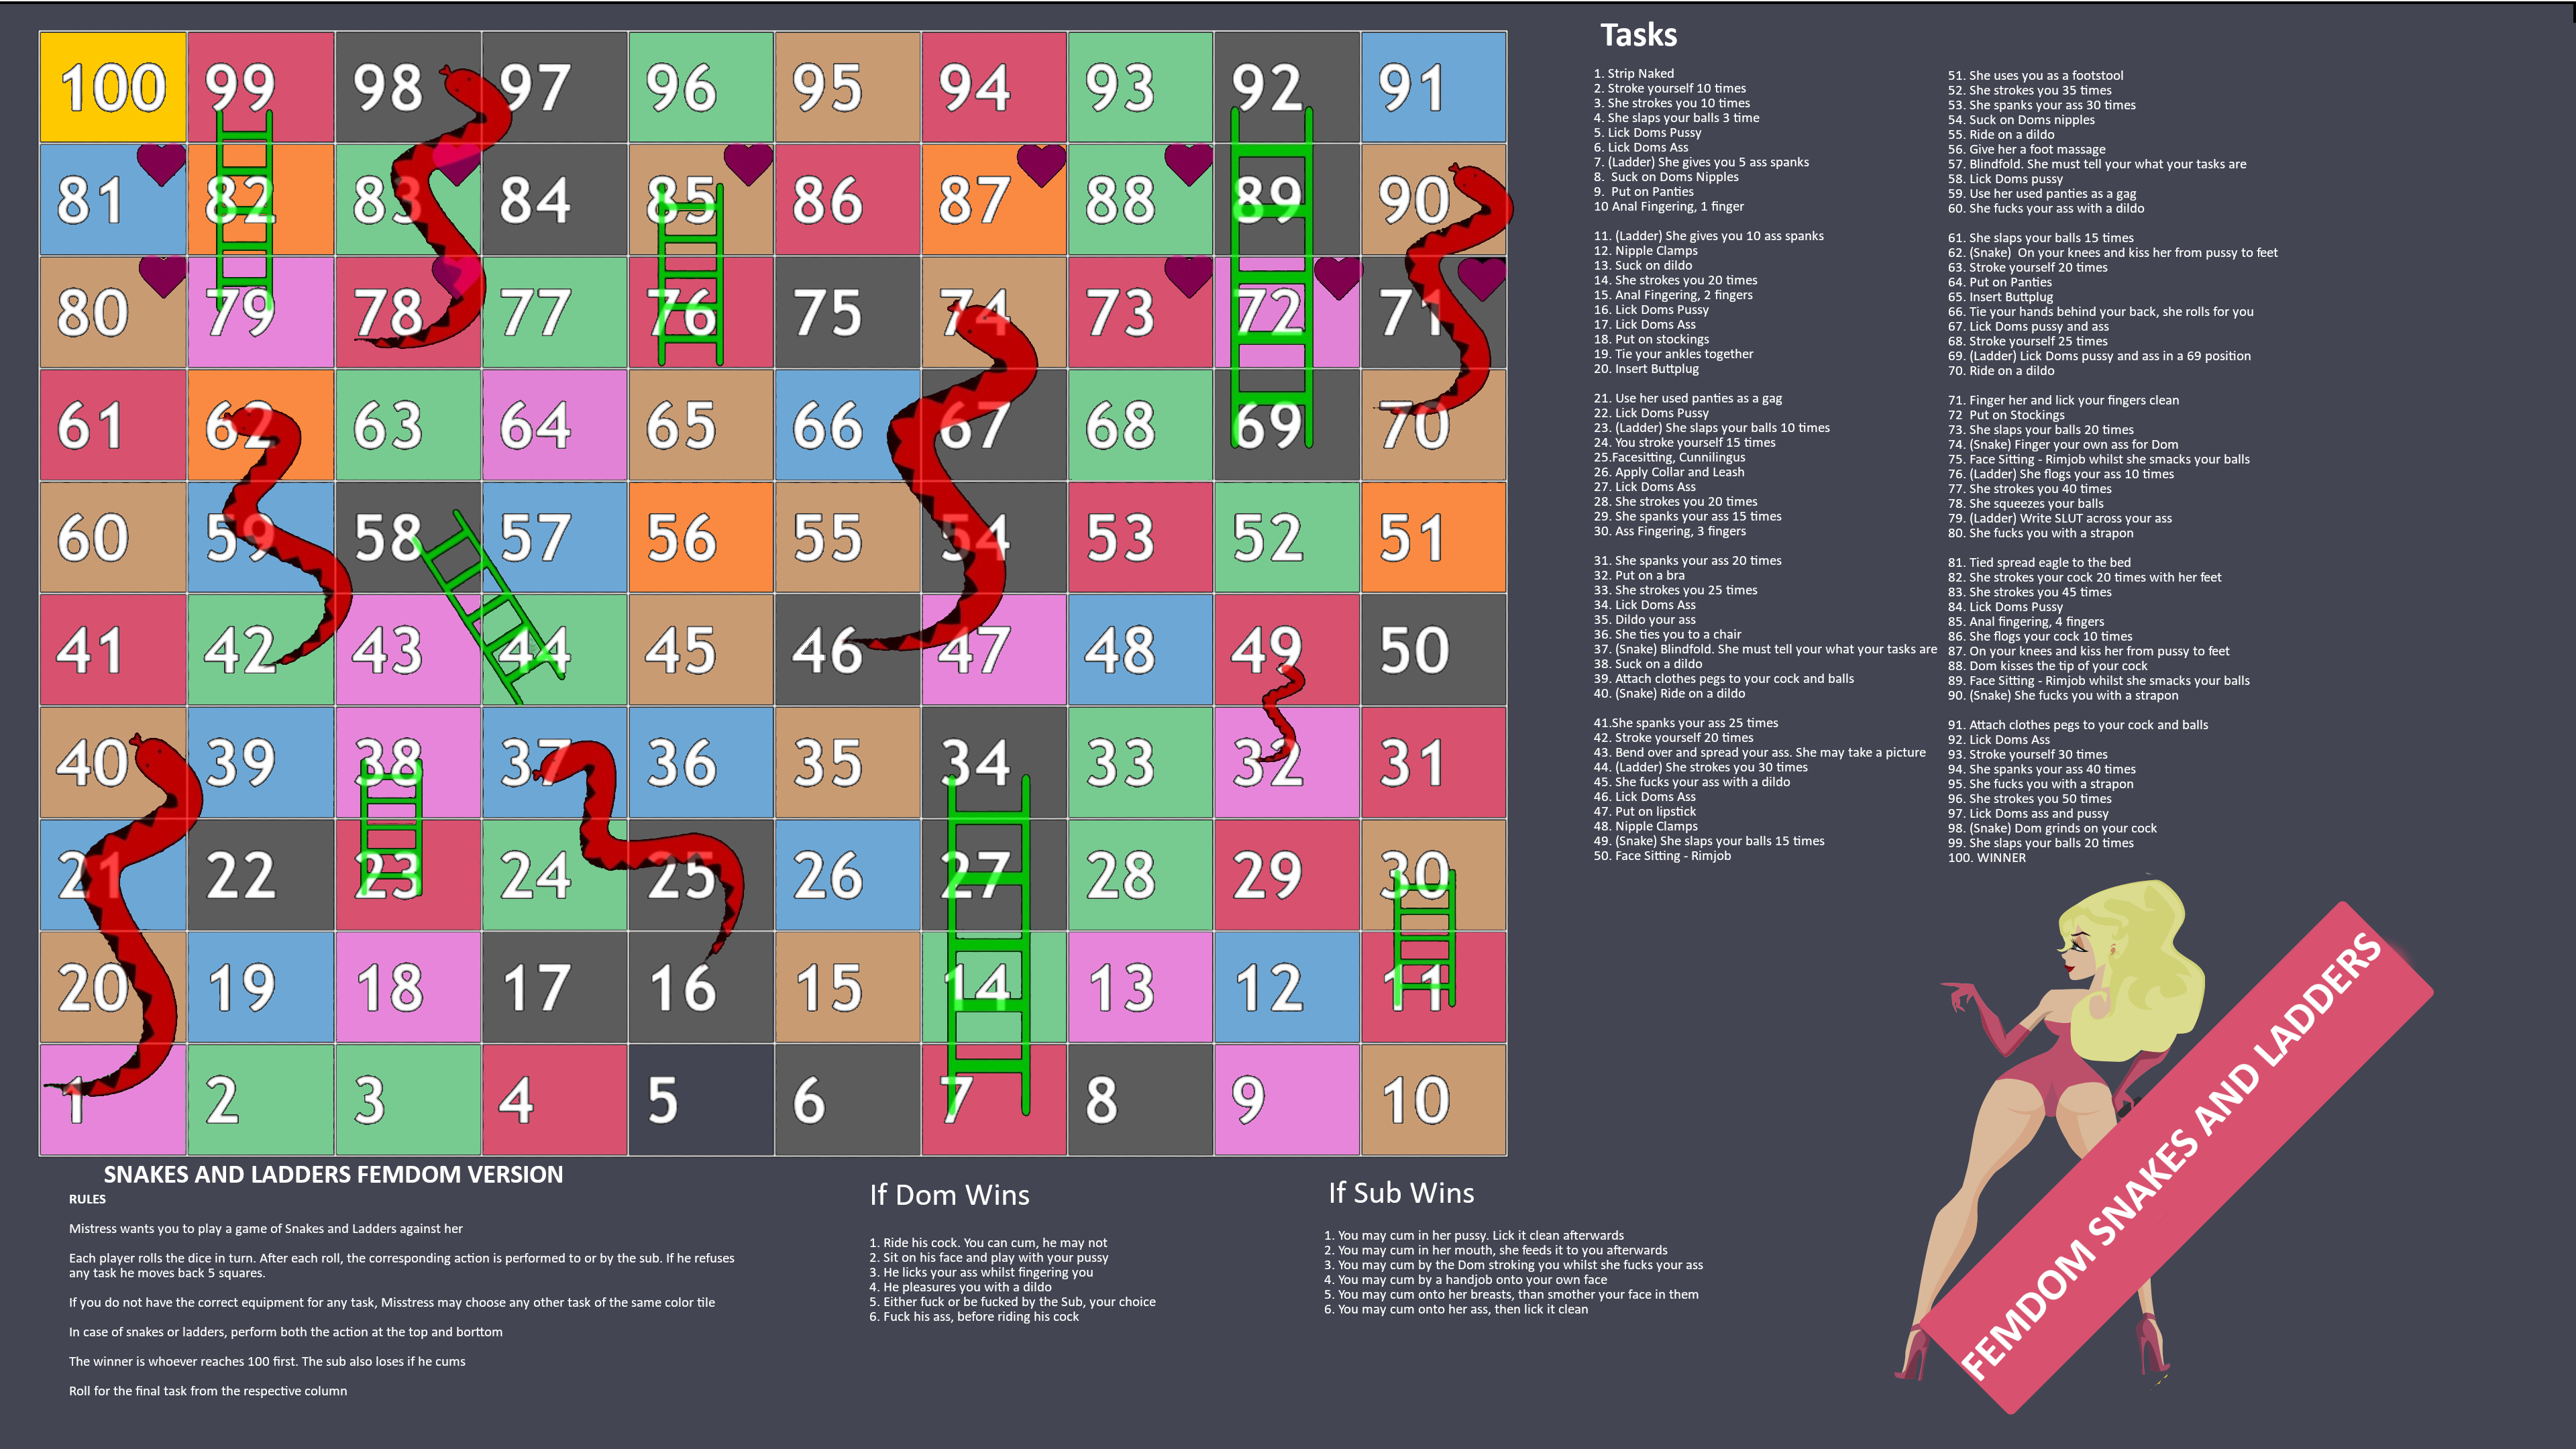 Femdom Snakes and Ladders - Fap Roulette.